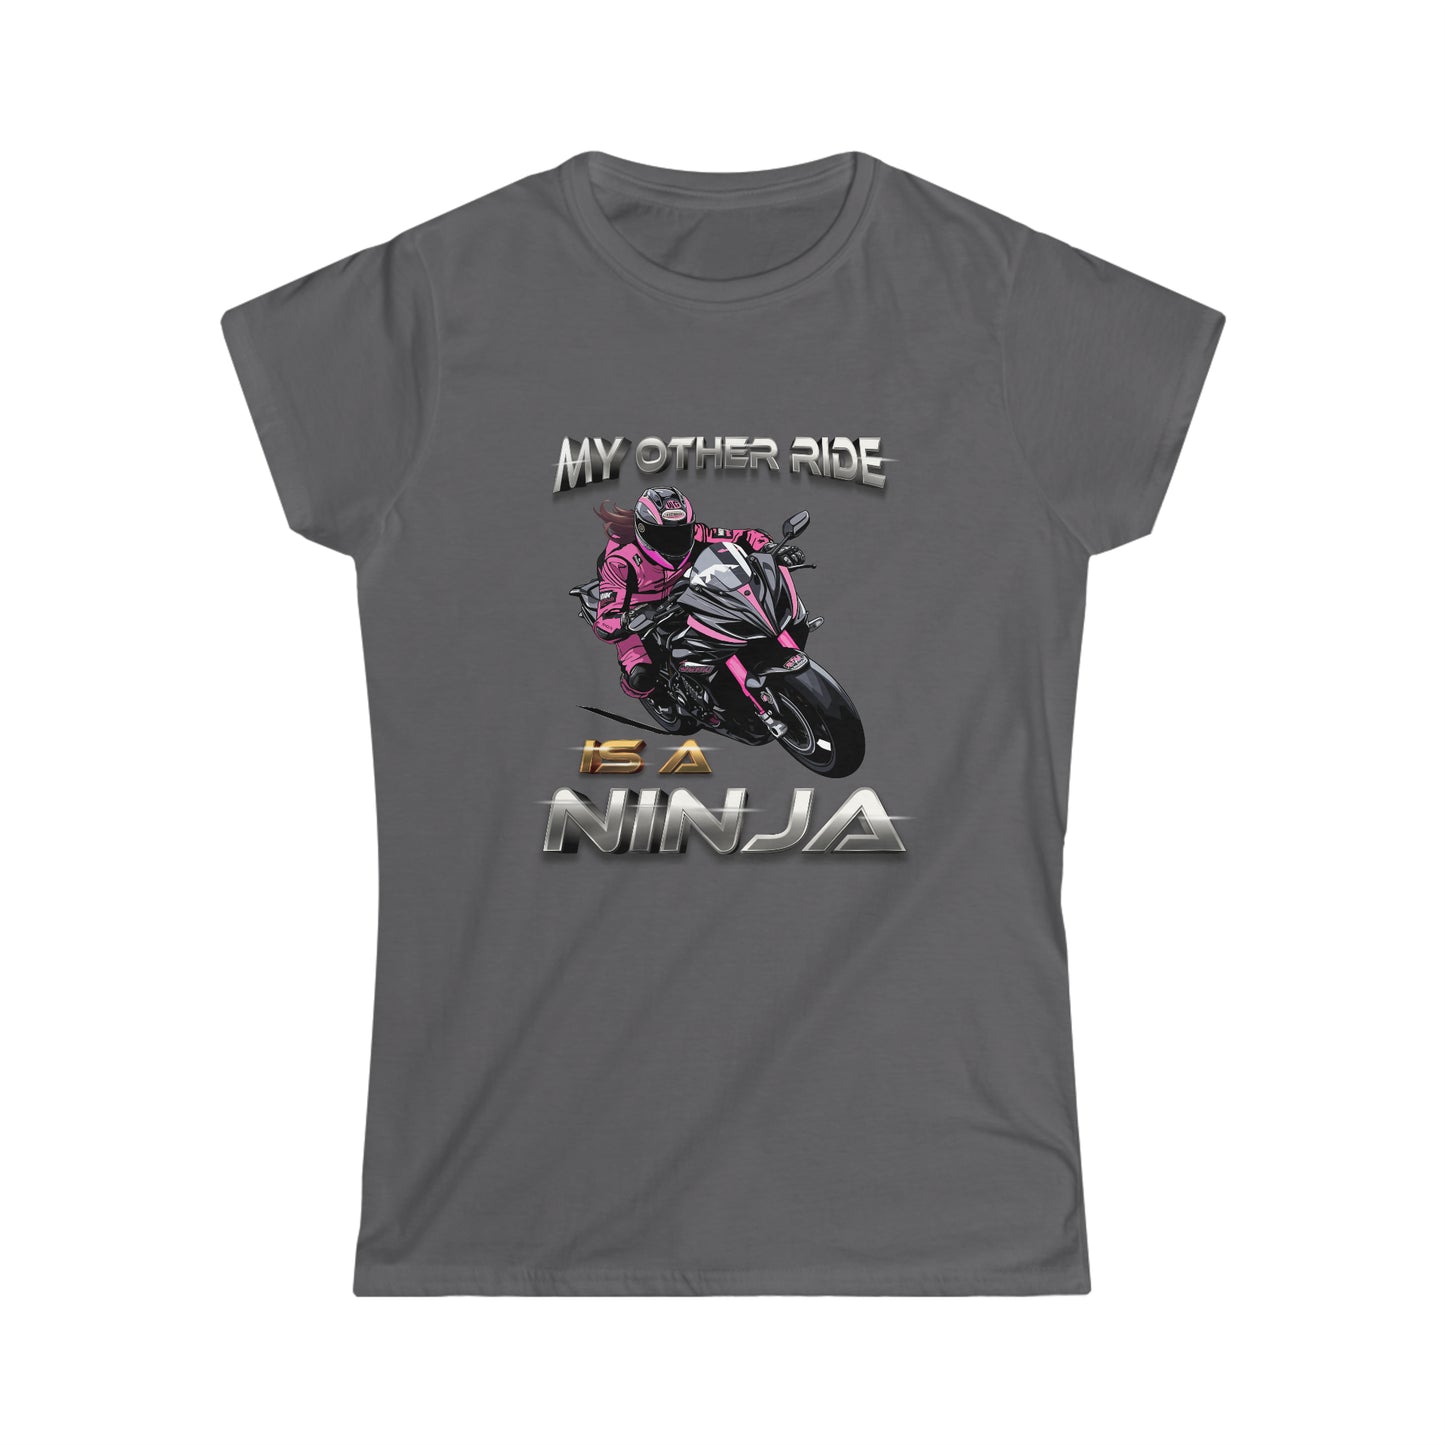 My Other Ride Is A Ninja - Women's Softstyle Tee